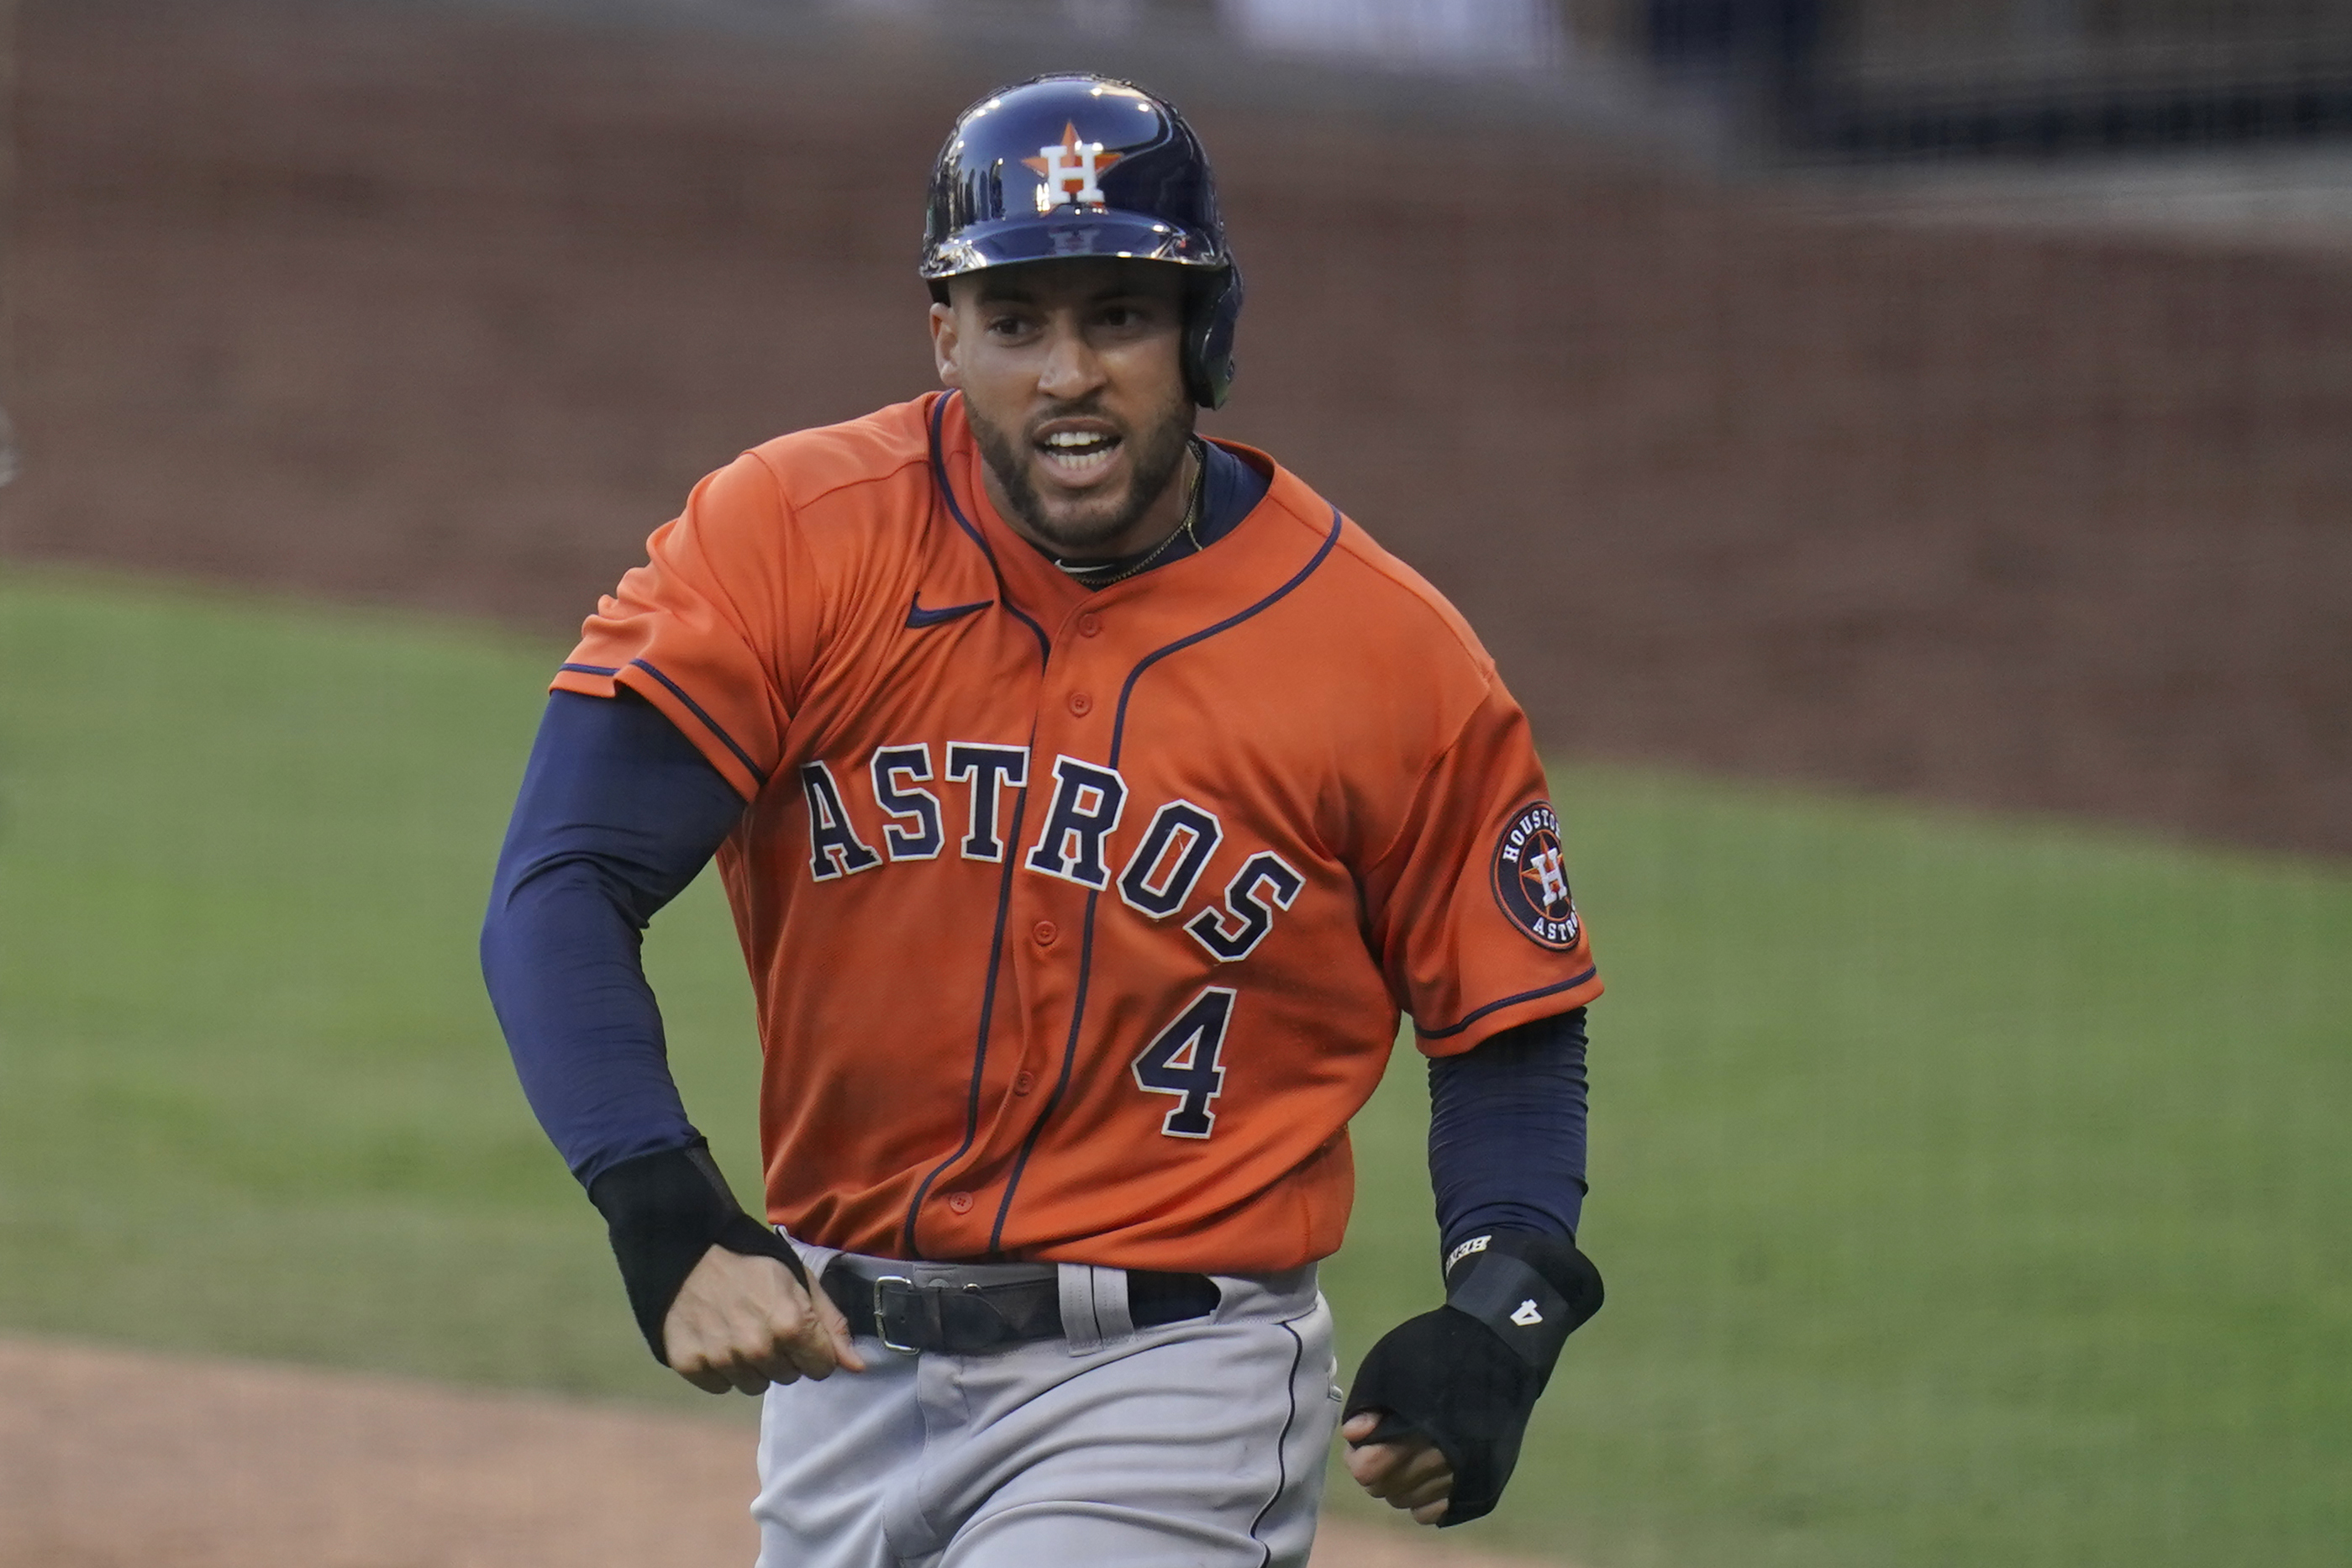 George Springer must be great for Jays to reach potential